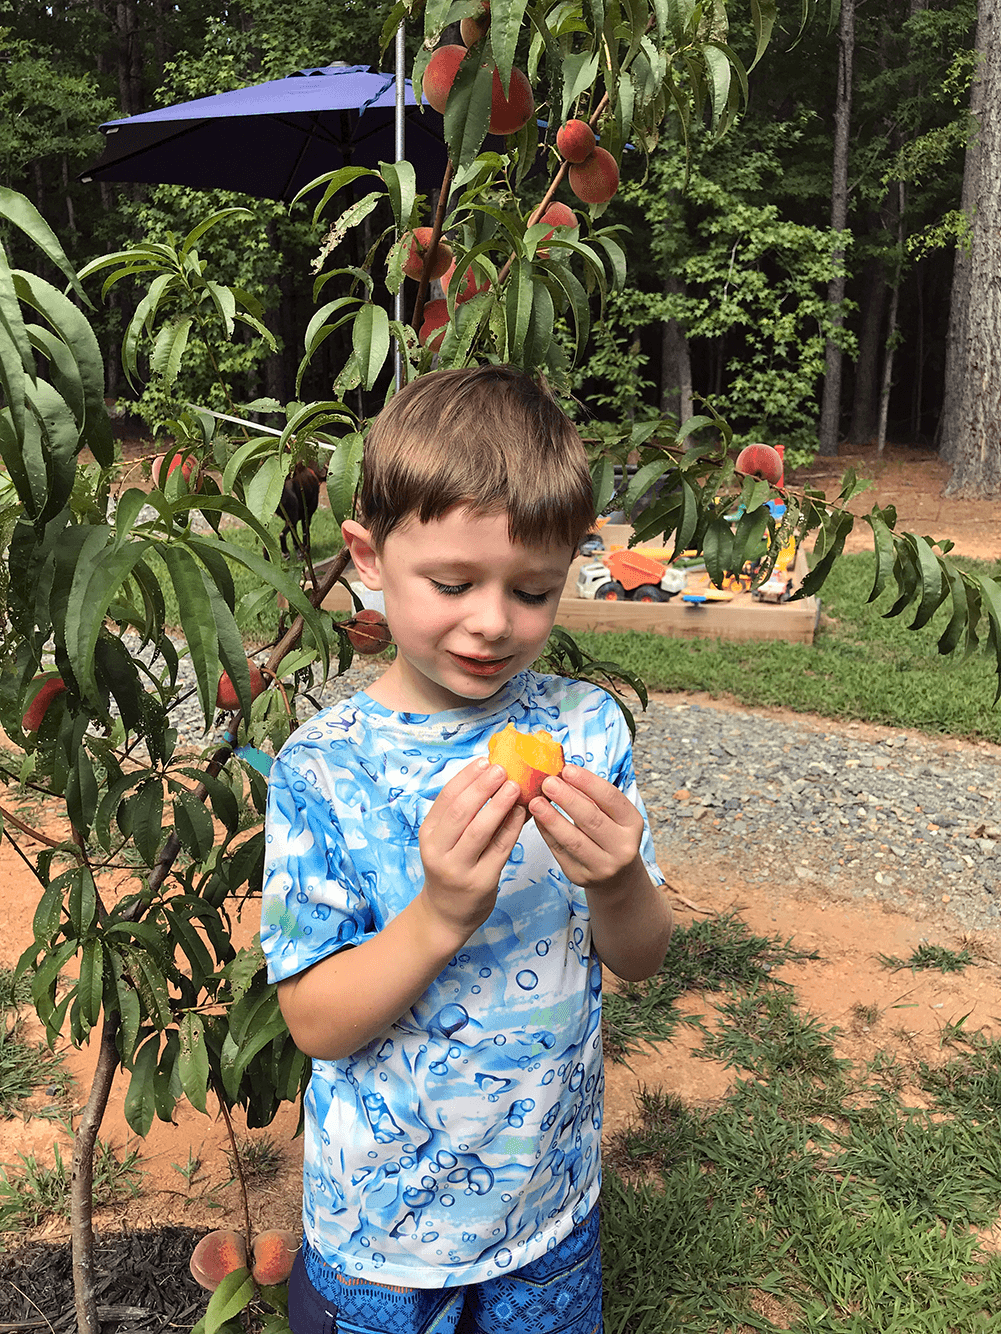 Marianna's son eating peaches in front of a peach tree